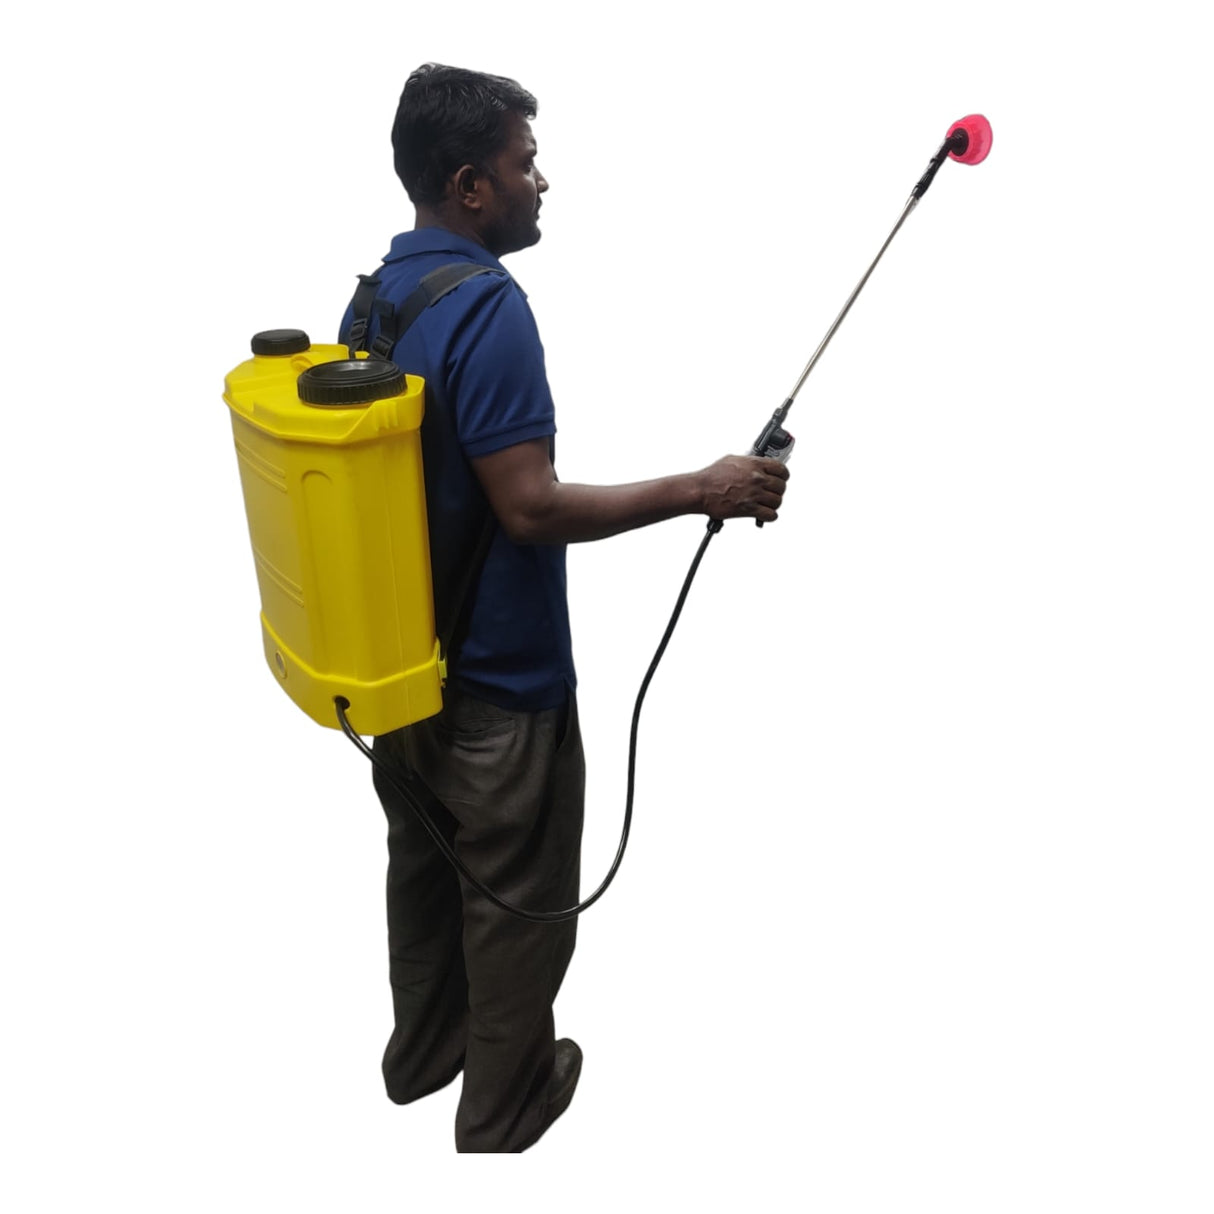 18 L, Battery 8A x 12V, 4 Nozzles, Heavy Duty Battery Sprayer For Pesticide Spraying in Farms